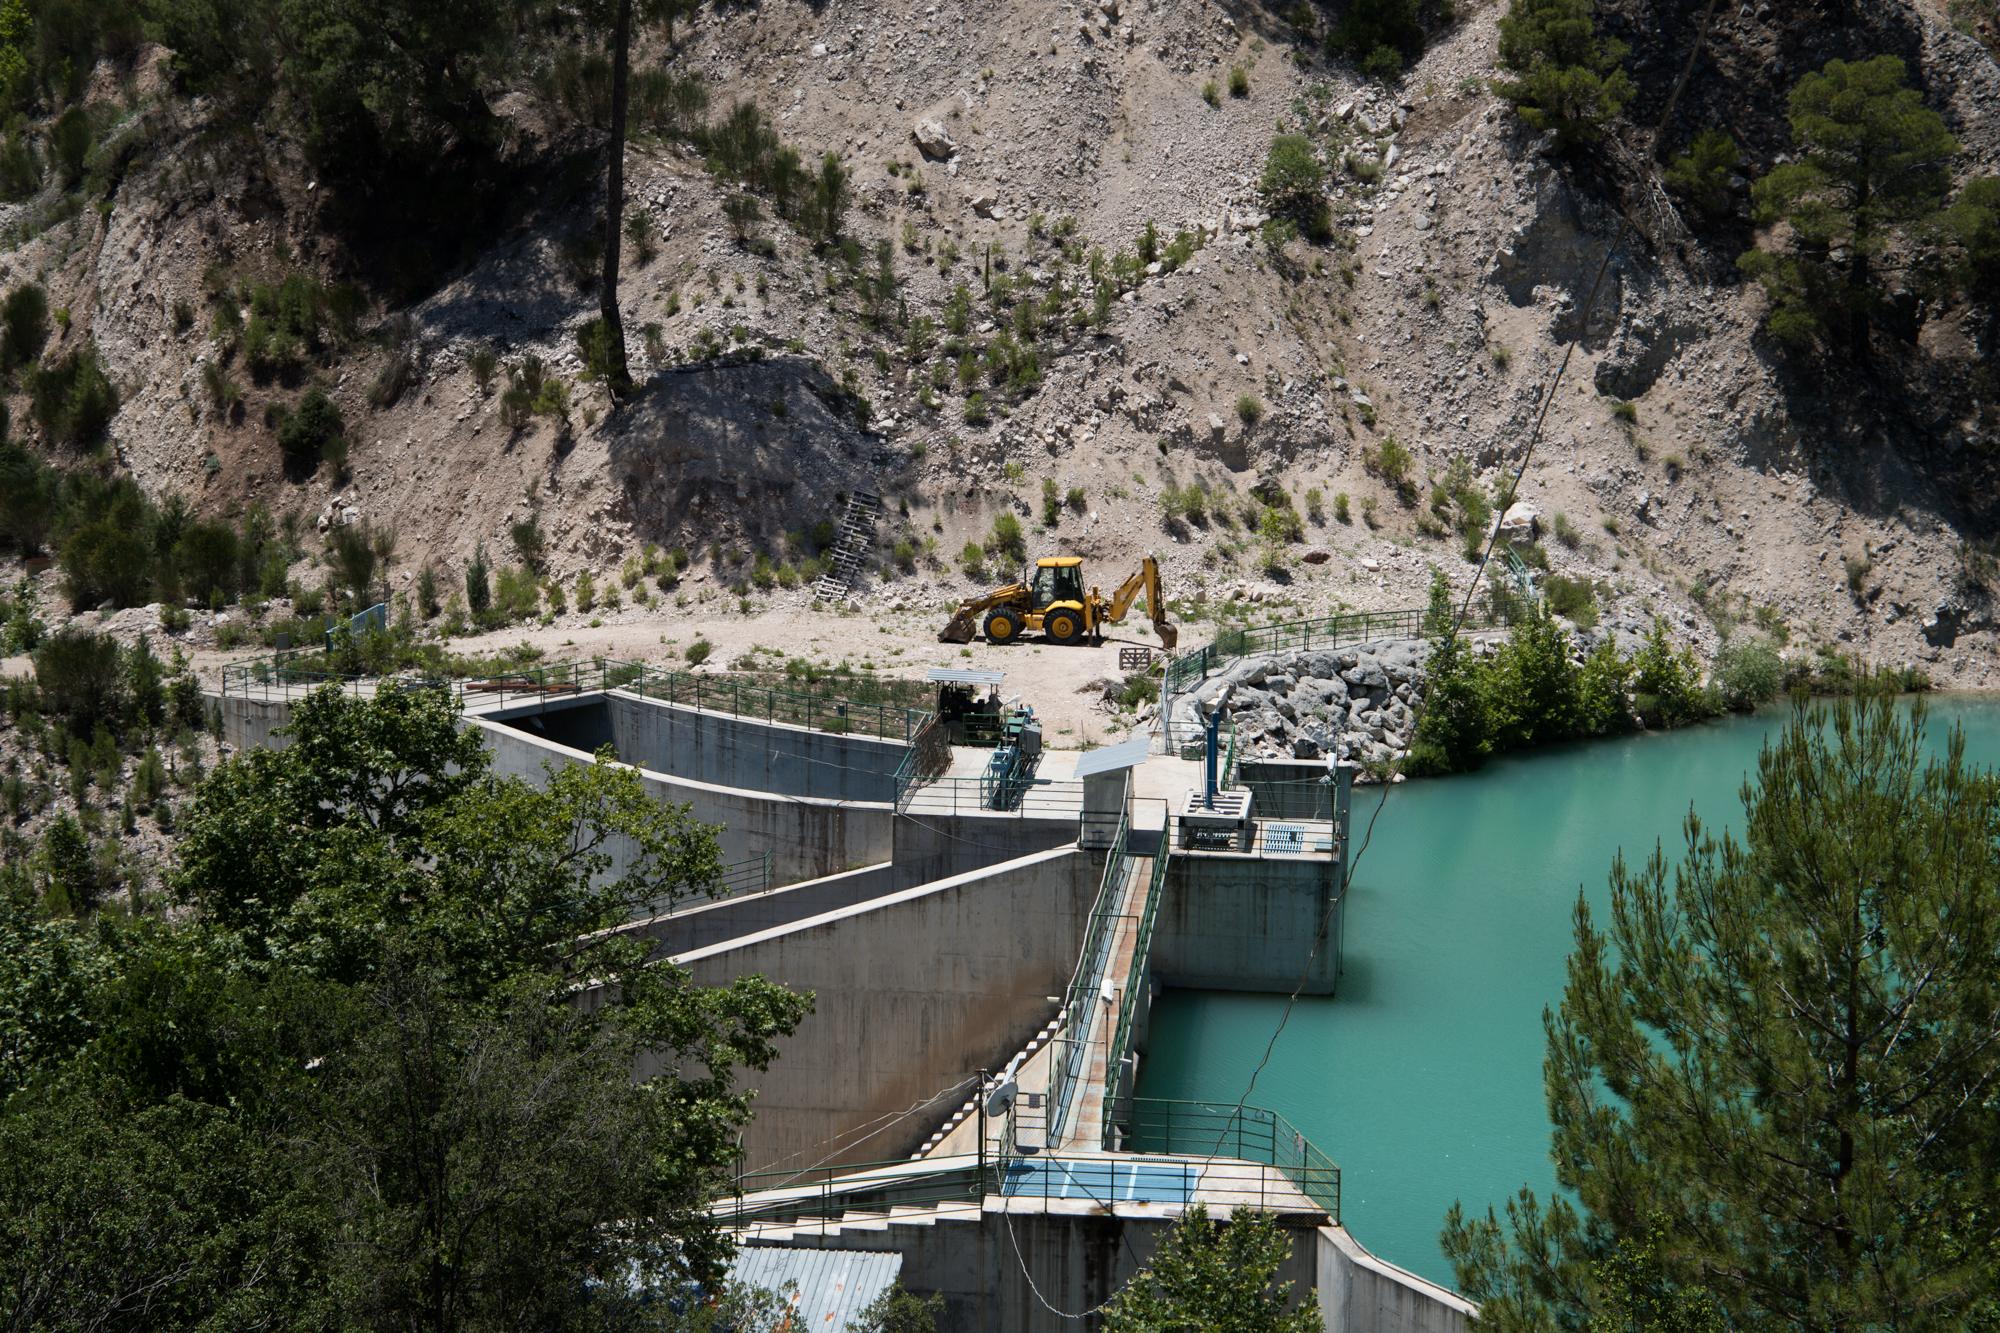 Alakir's guardians - One of the dams of a hydroelectric power plant built on...